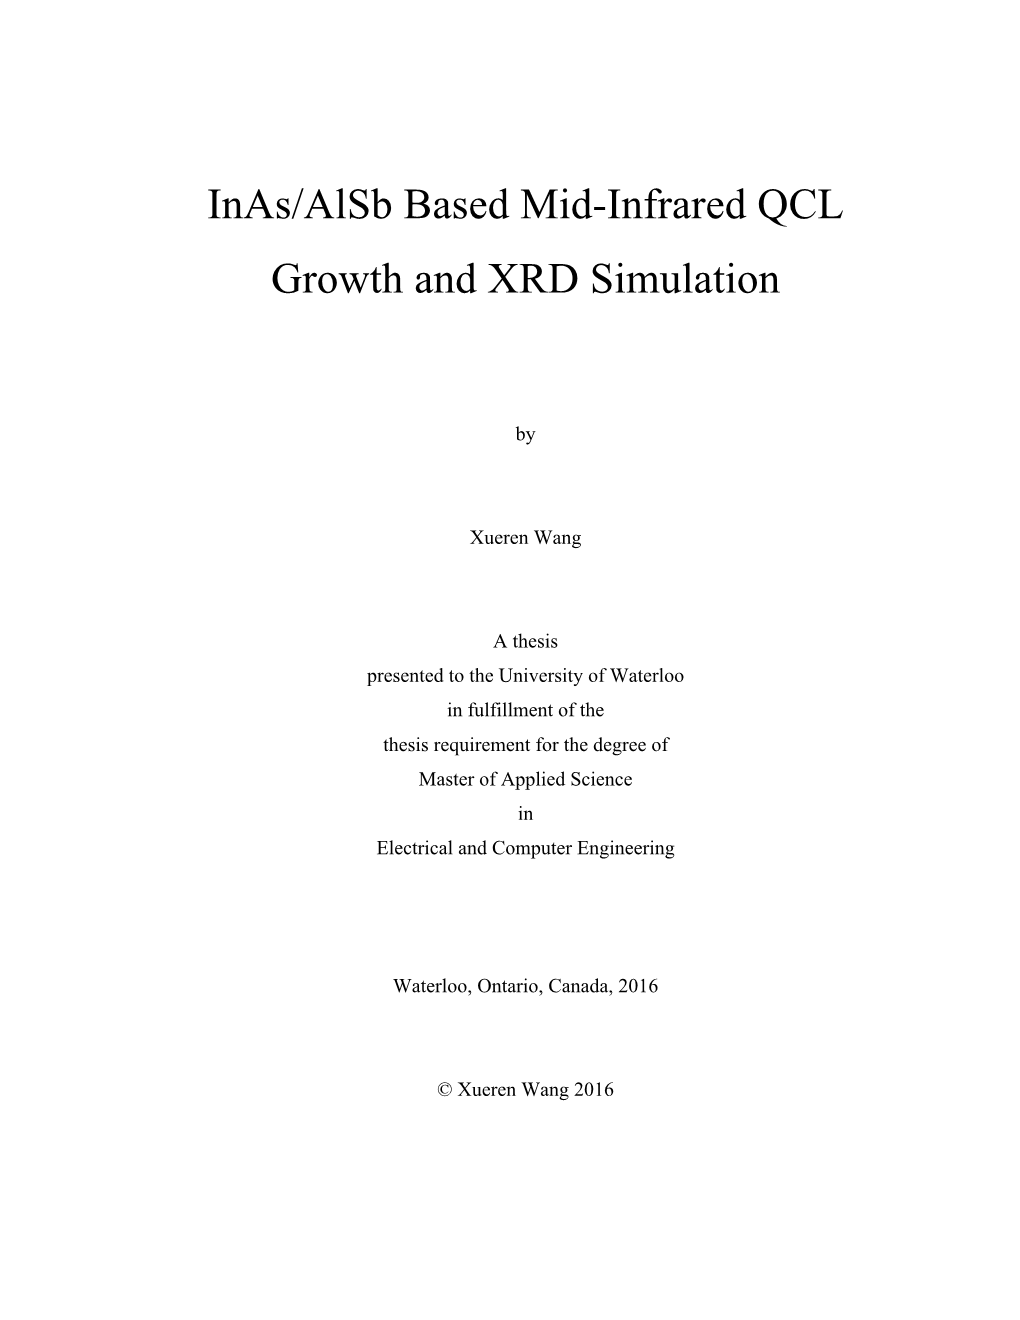 Inas/Alsb Based Mid-Infrared QCL Growth and XRD Simulation